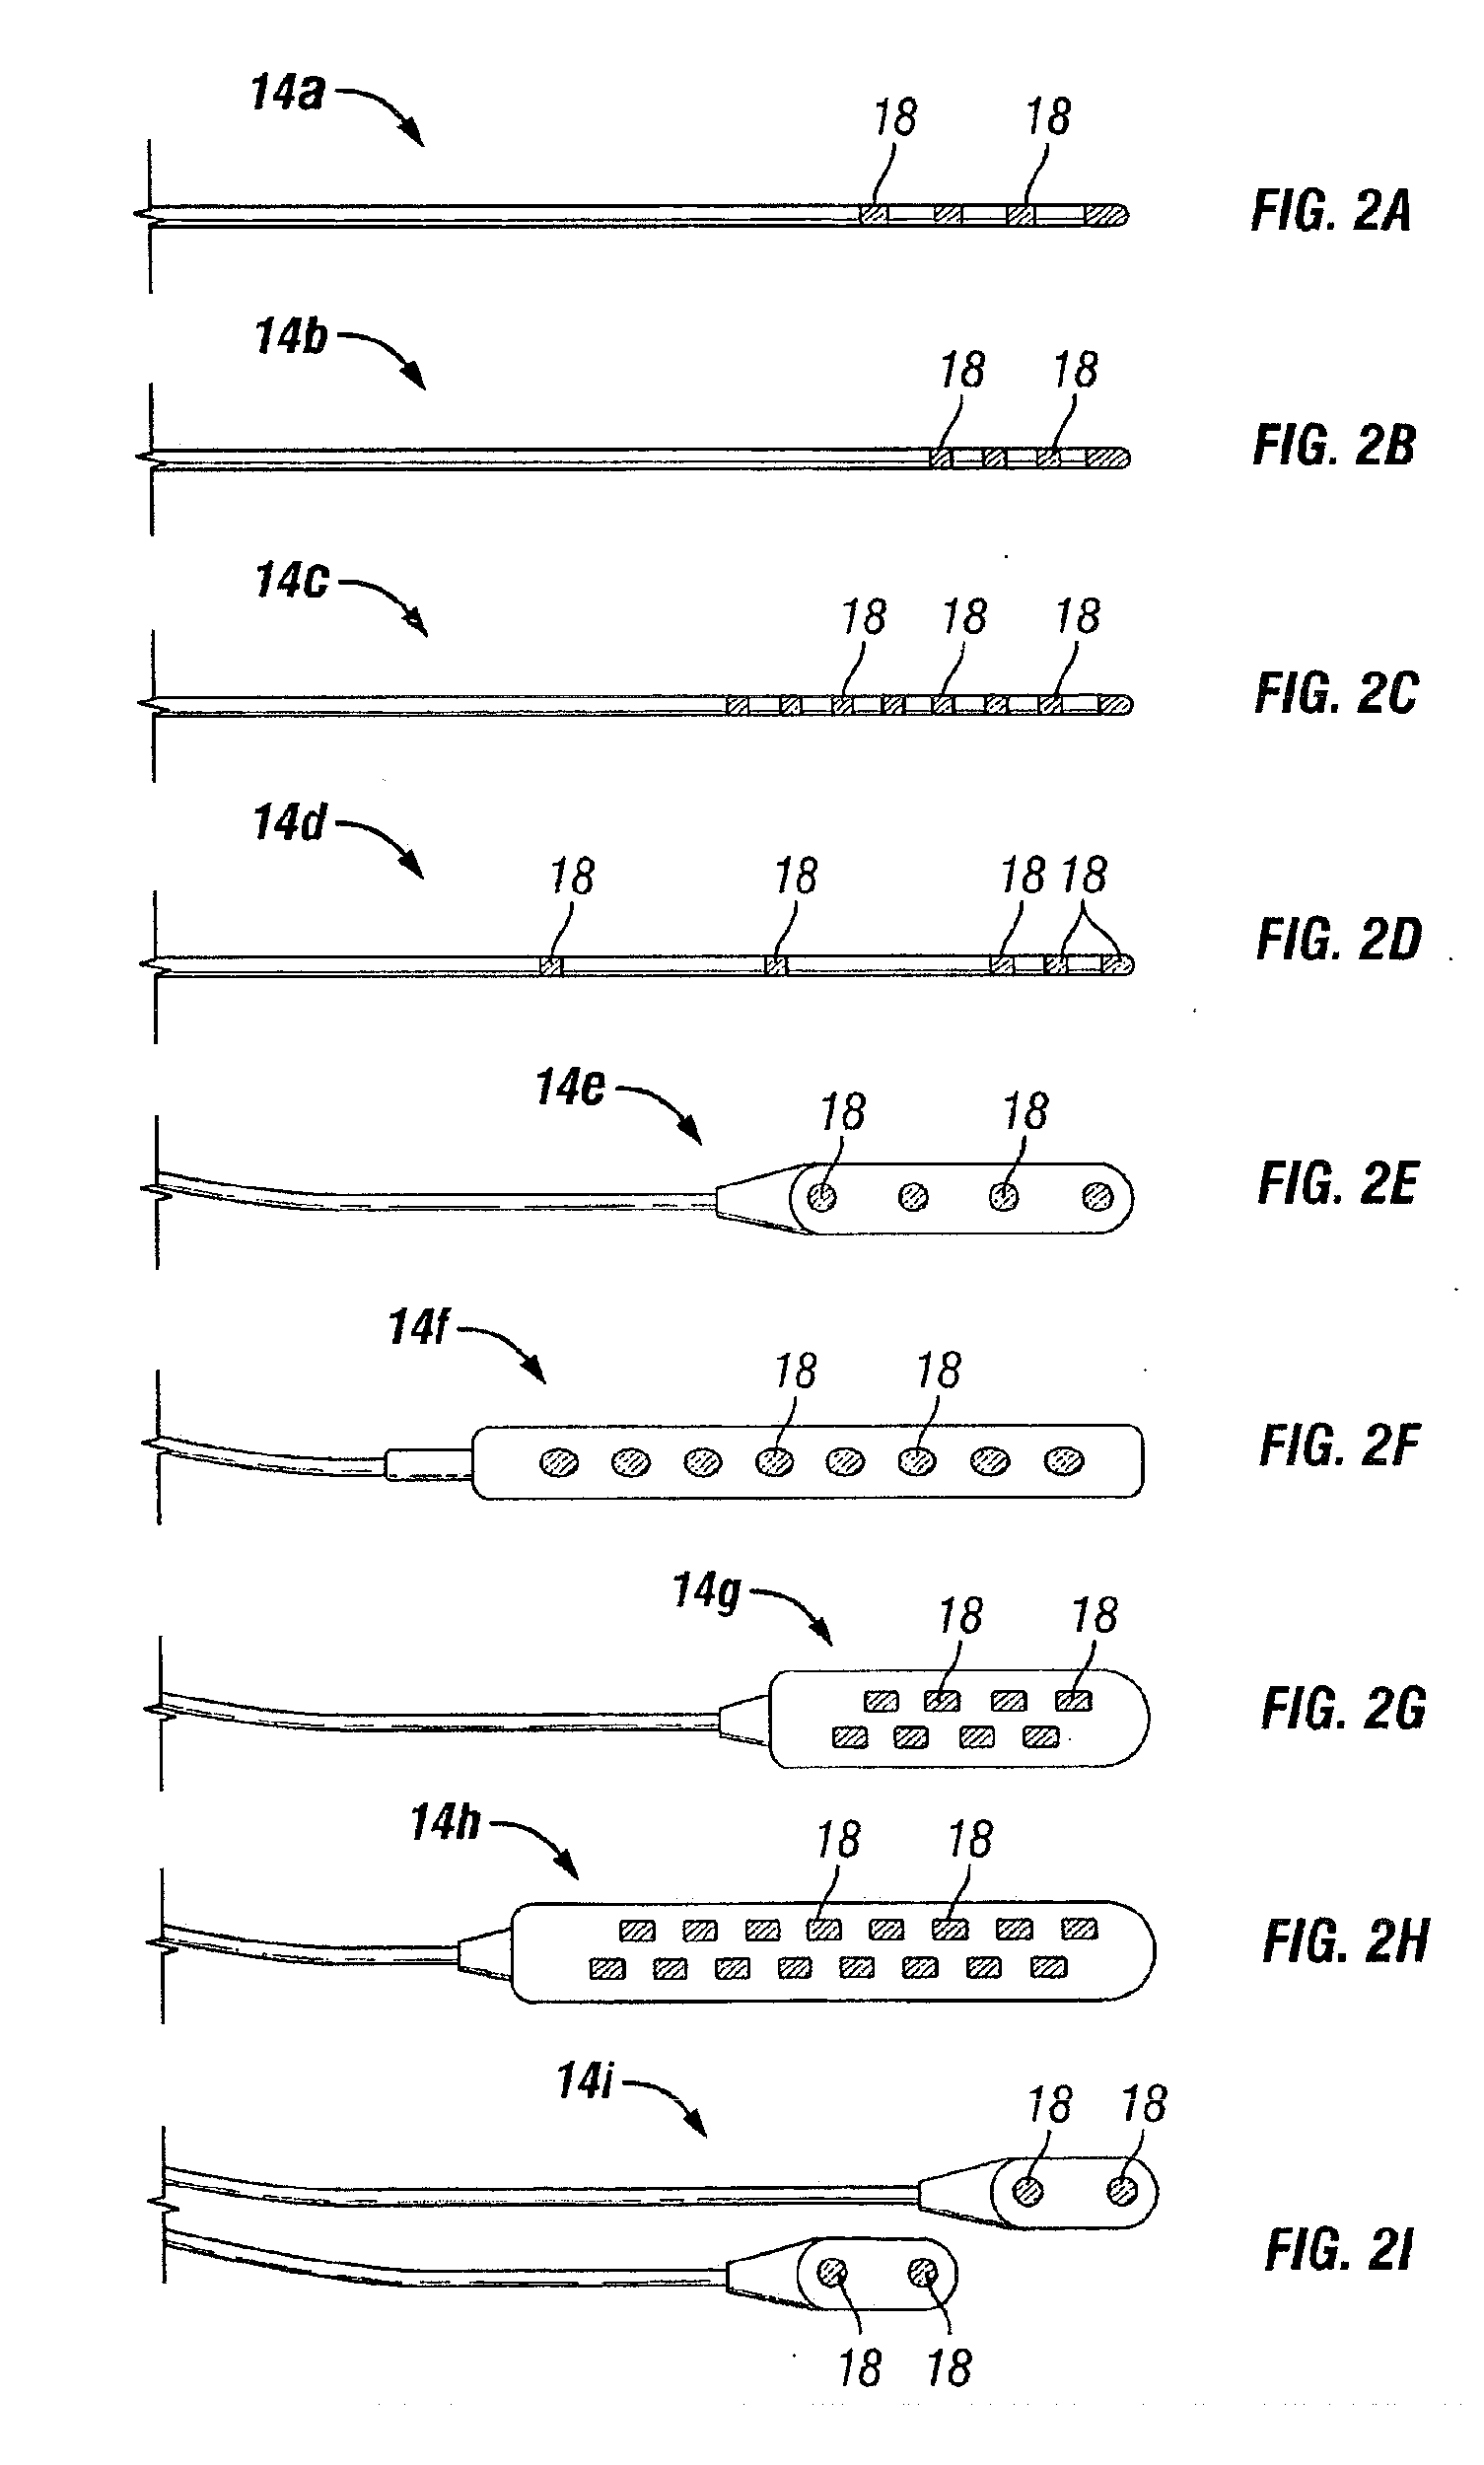 Method of using spinal cord stimulation to treat gastrointestinal and/or eating disorders or conditions